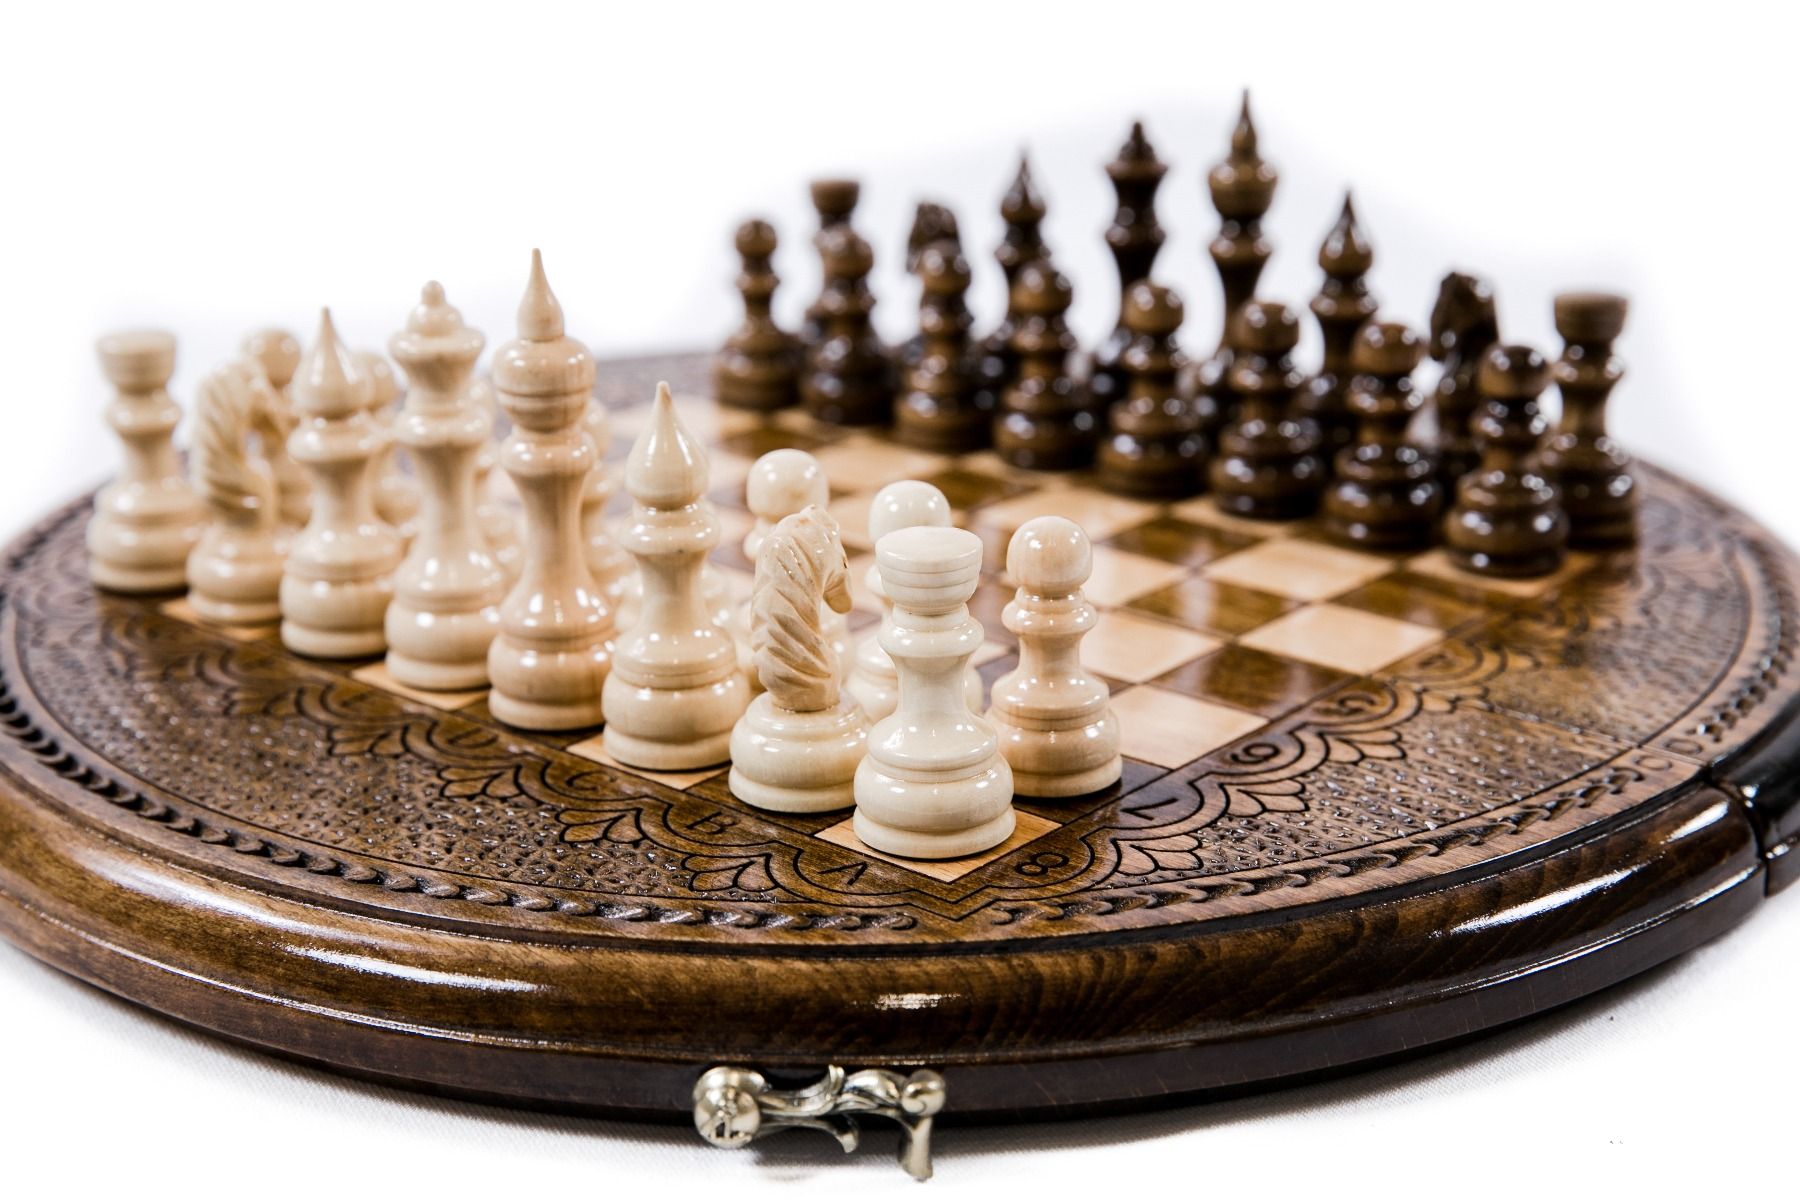 Dive into a new dimension of chess with a circular wooden board, handcrafted for strategic depth and visual elegance.